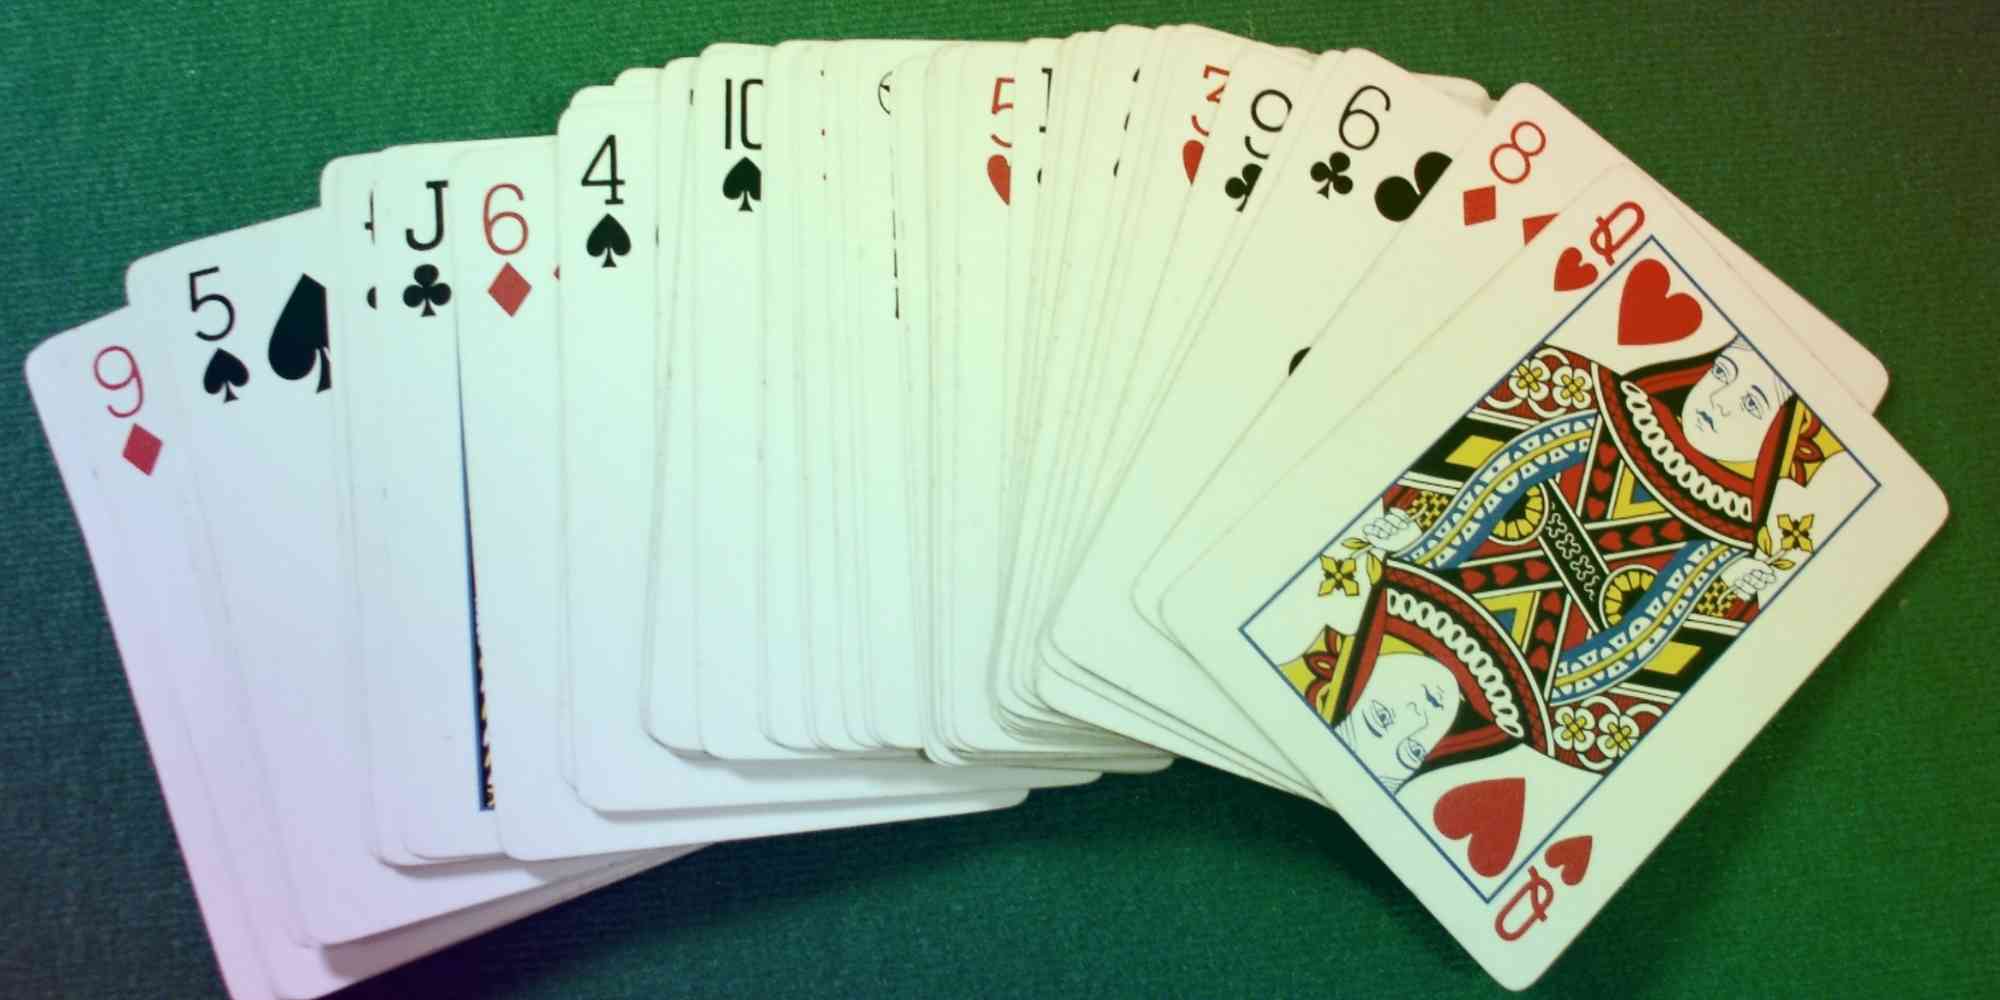 Blackjack counting cards casino 39166